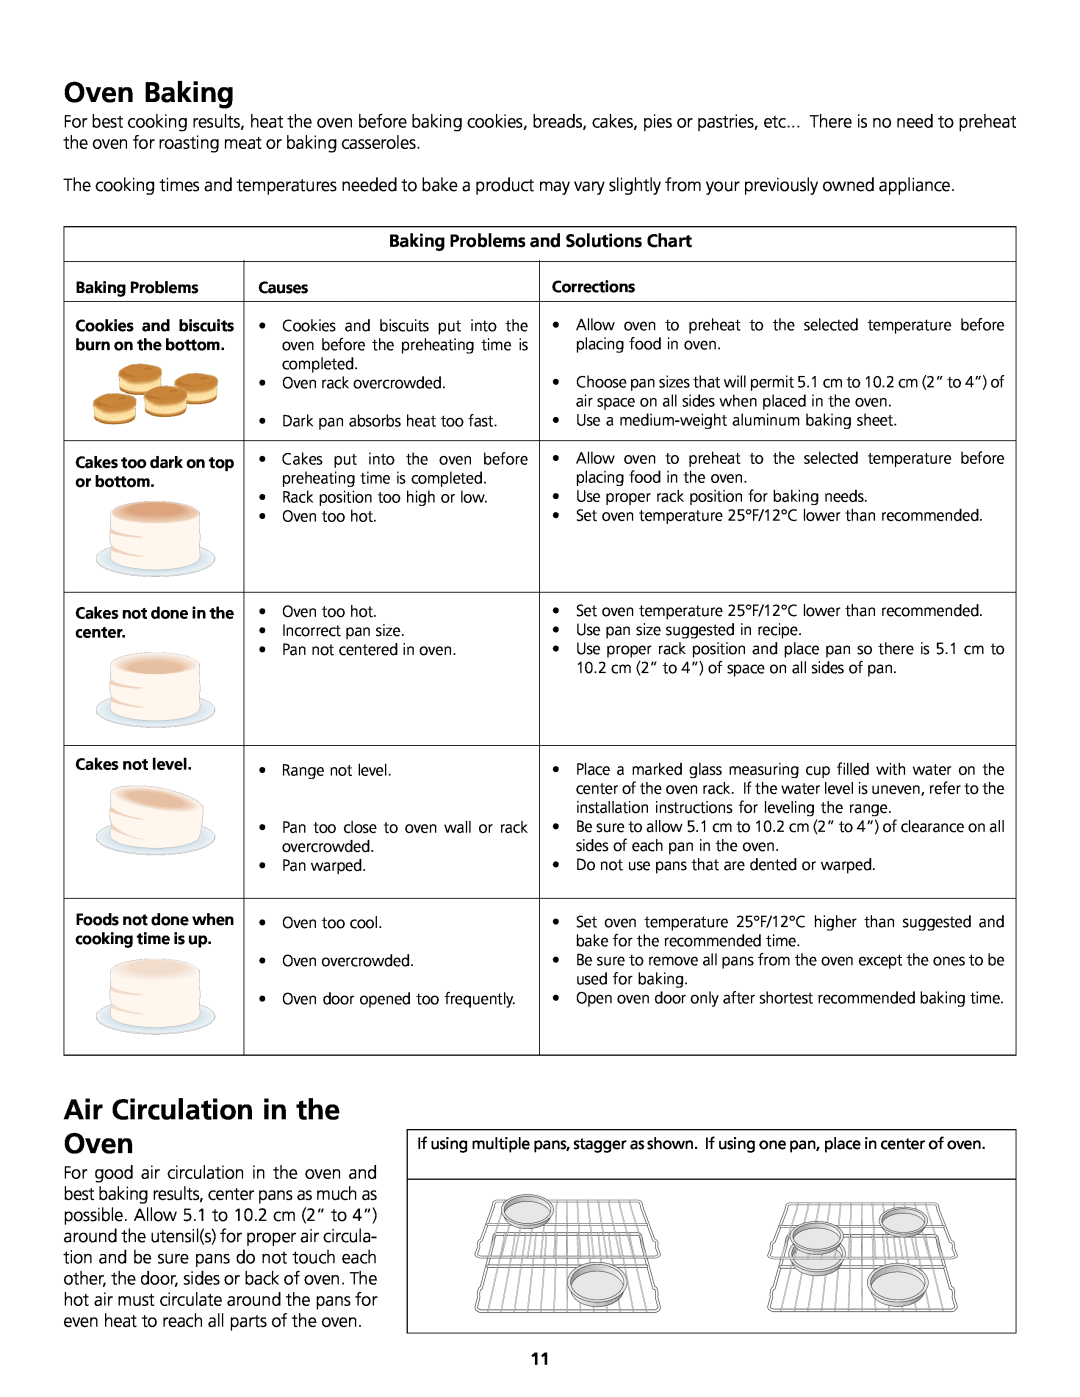 Frigidaire 318200858 Oven Baking, Air Circulation in the Oven, Baking Problems and Solutions Chart 